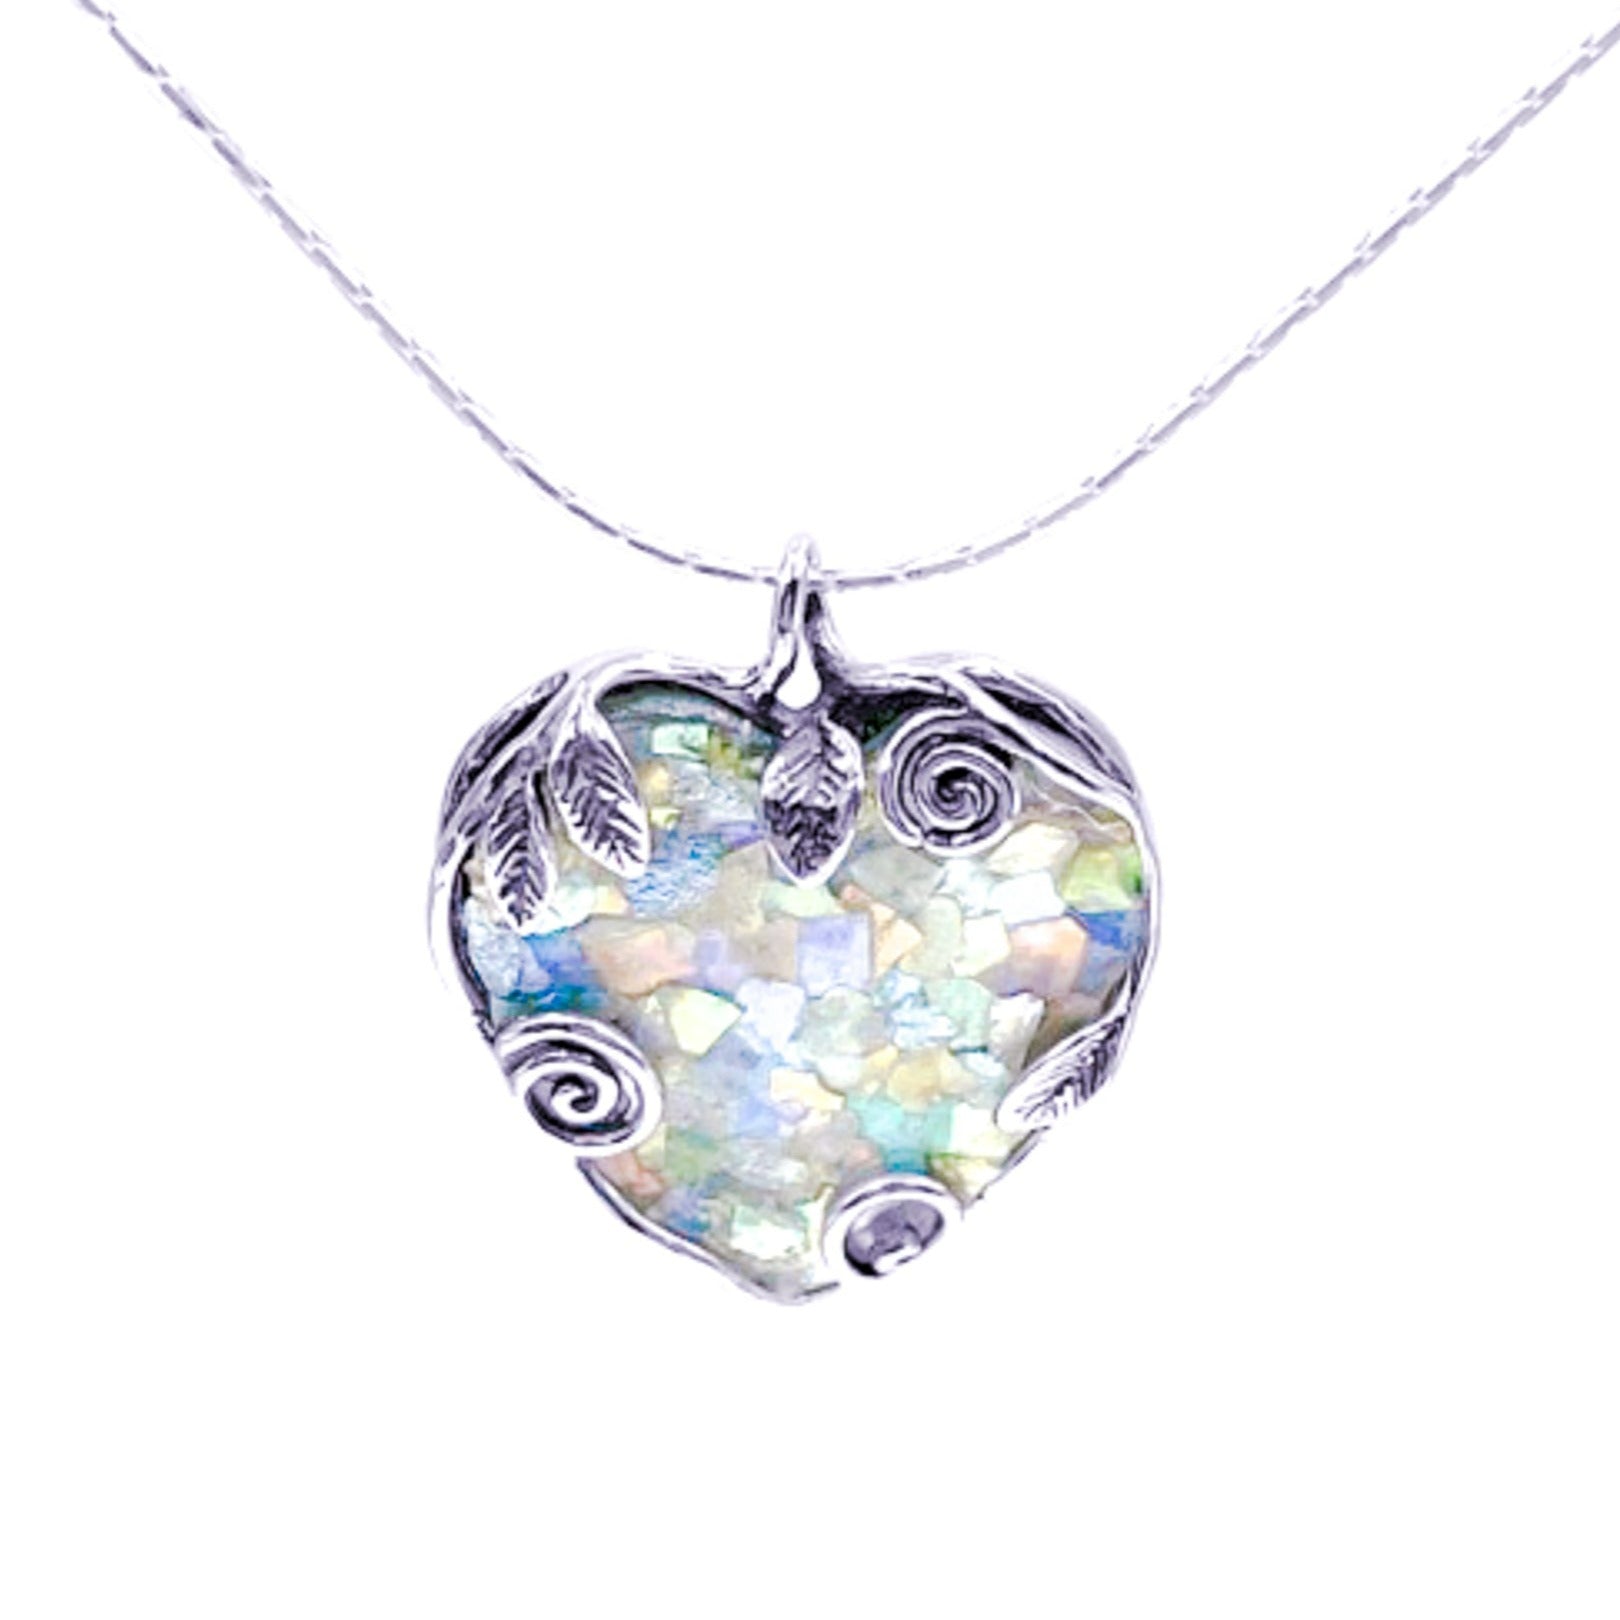 Heart shaped Roman Glass set in 925 Sterling Silver with vines and leaves detailing - the spirals and leaves are holding the stone down